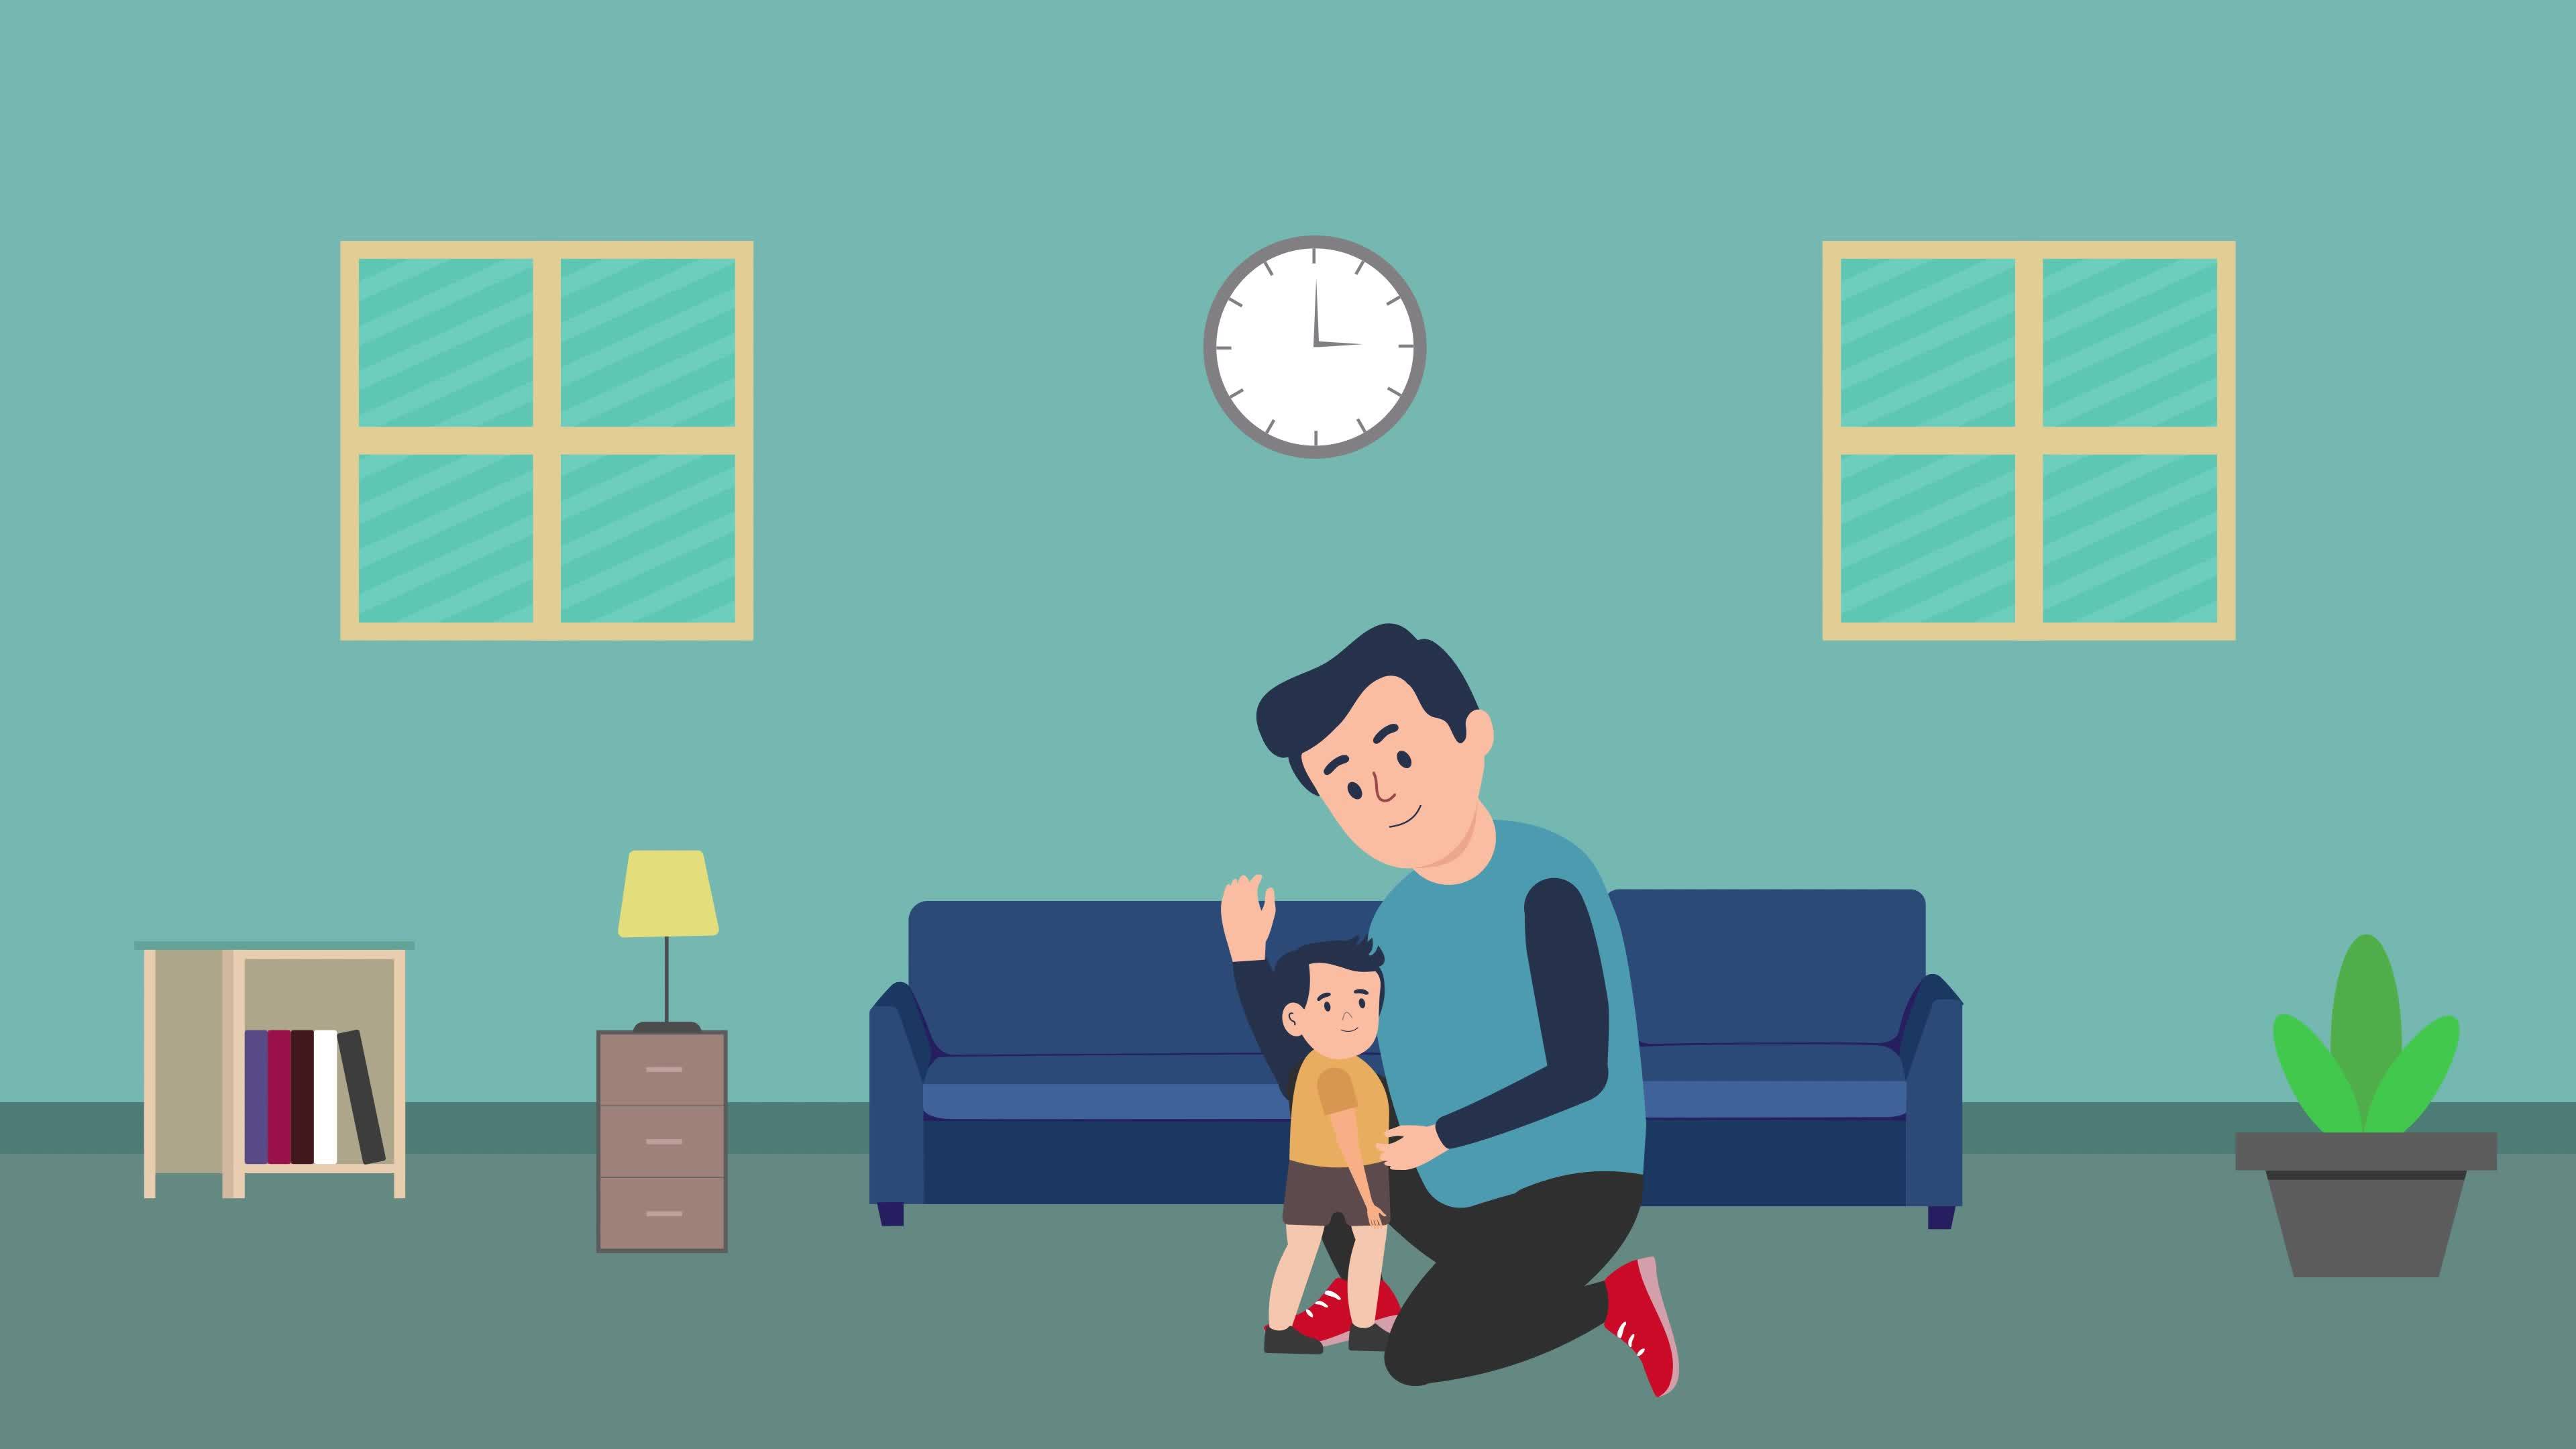 Father and son hugging each other 4K animation. House interior with man  flat character 4K footage. Home interior with a sofa, wall clock,  bookshelf, and flat male character hugging animated video. 8249814